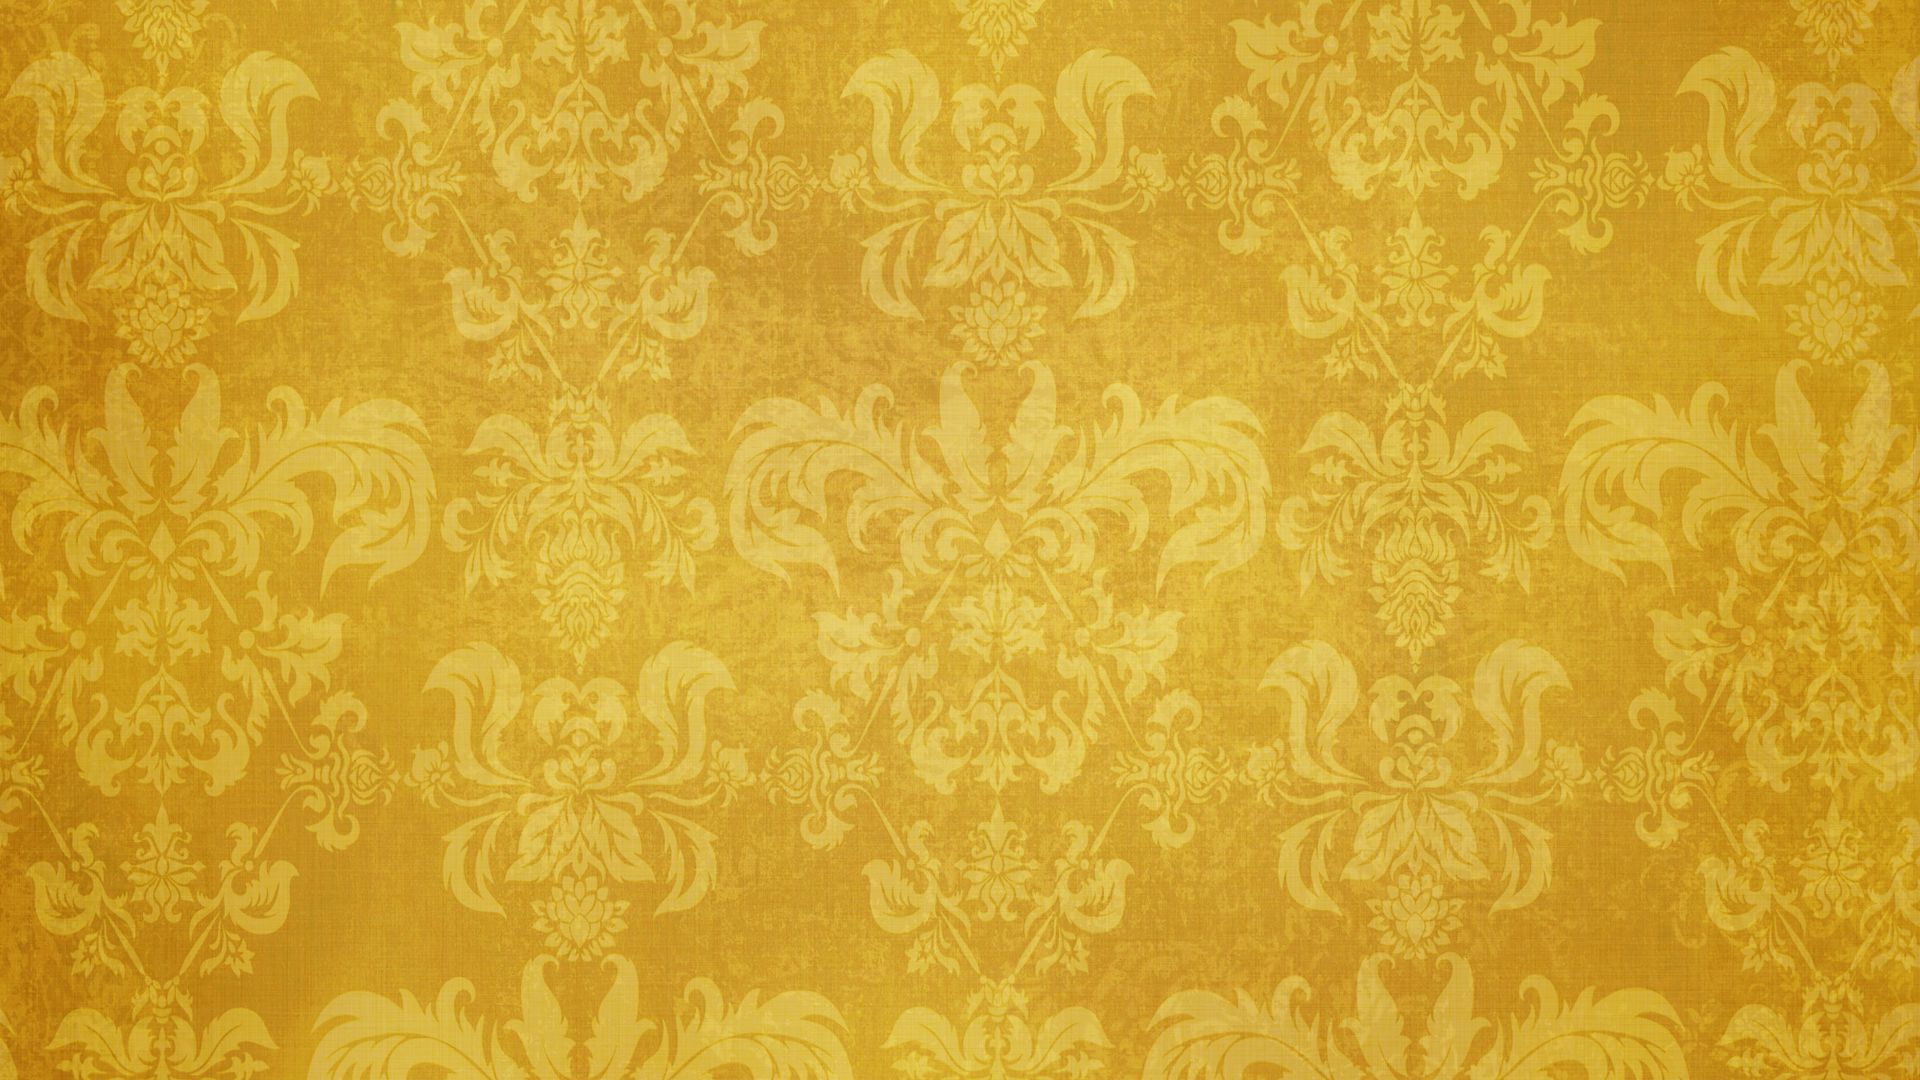 Download wallpaper 1920x1080 pattern, ornament, texture, brown full hd,  hdtv, fhd, 1080p hd background